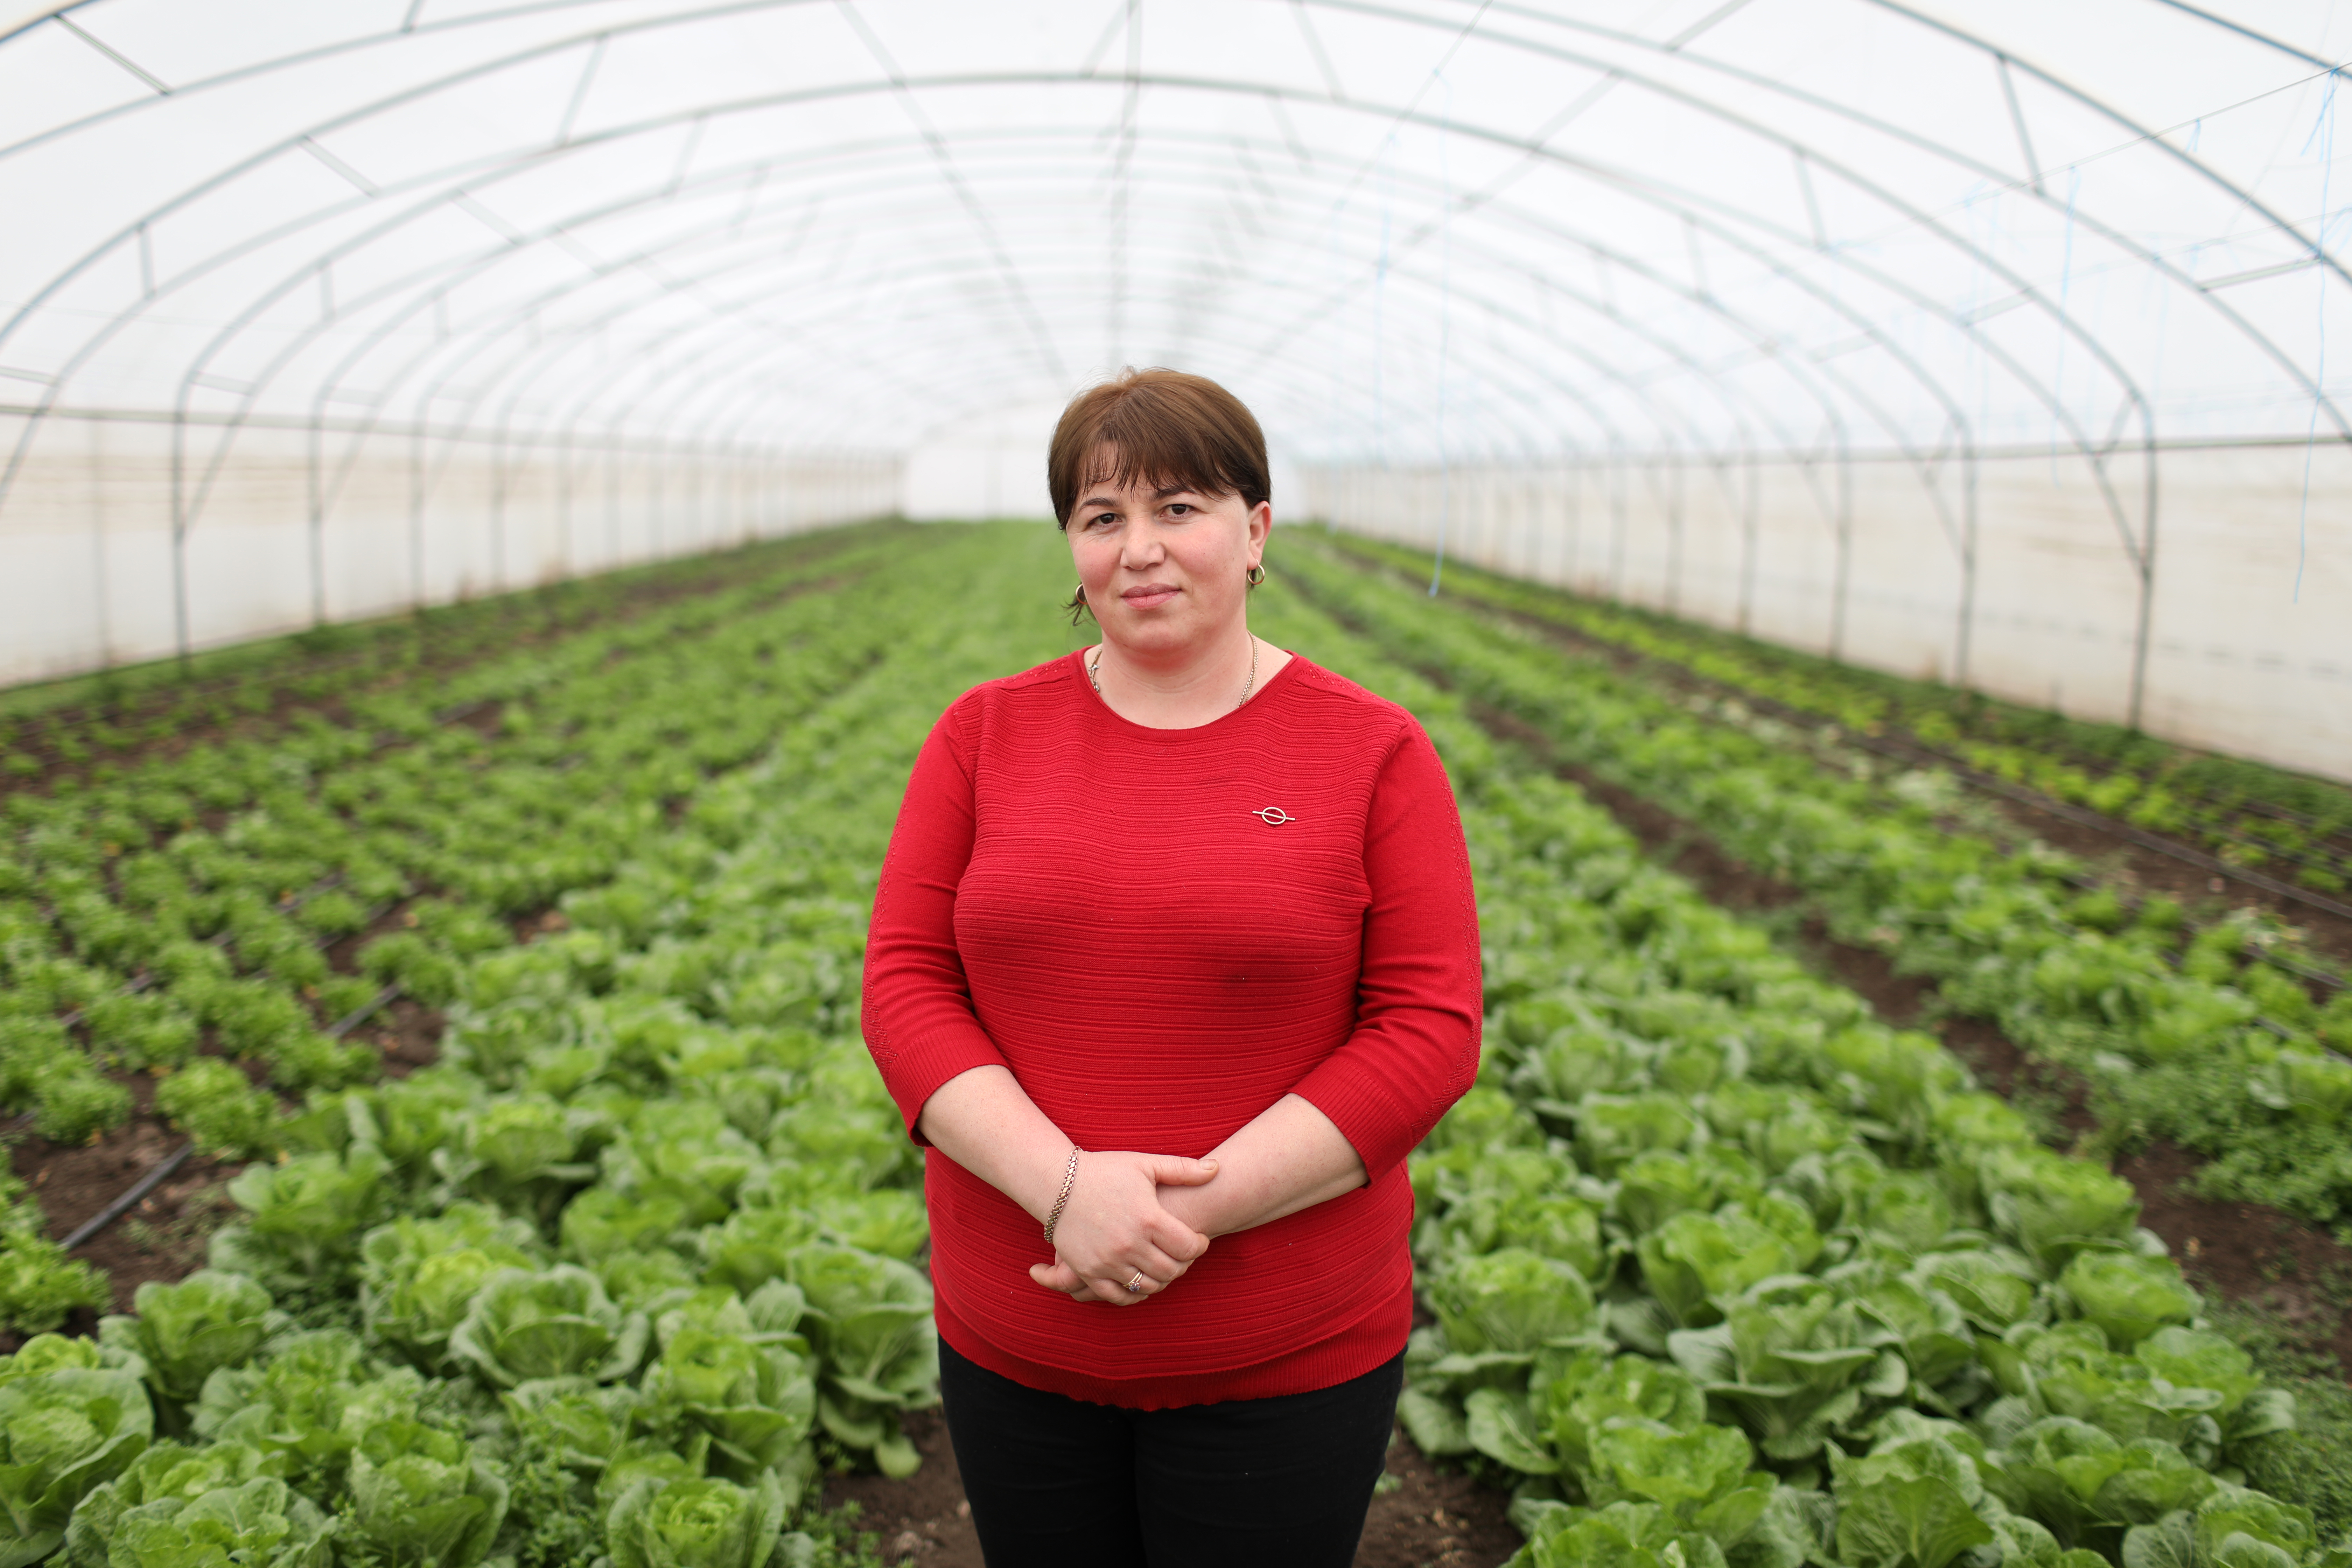 A woman named Naira Bolkvadze is wearing a red mid-sleeve shirt. She is standing in a greenhouse